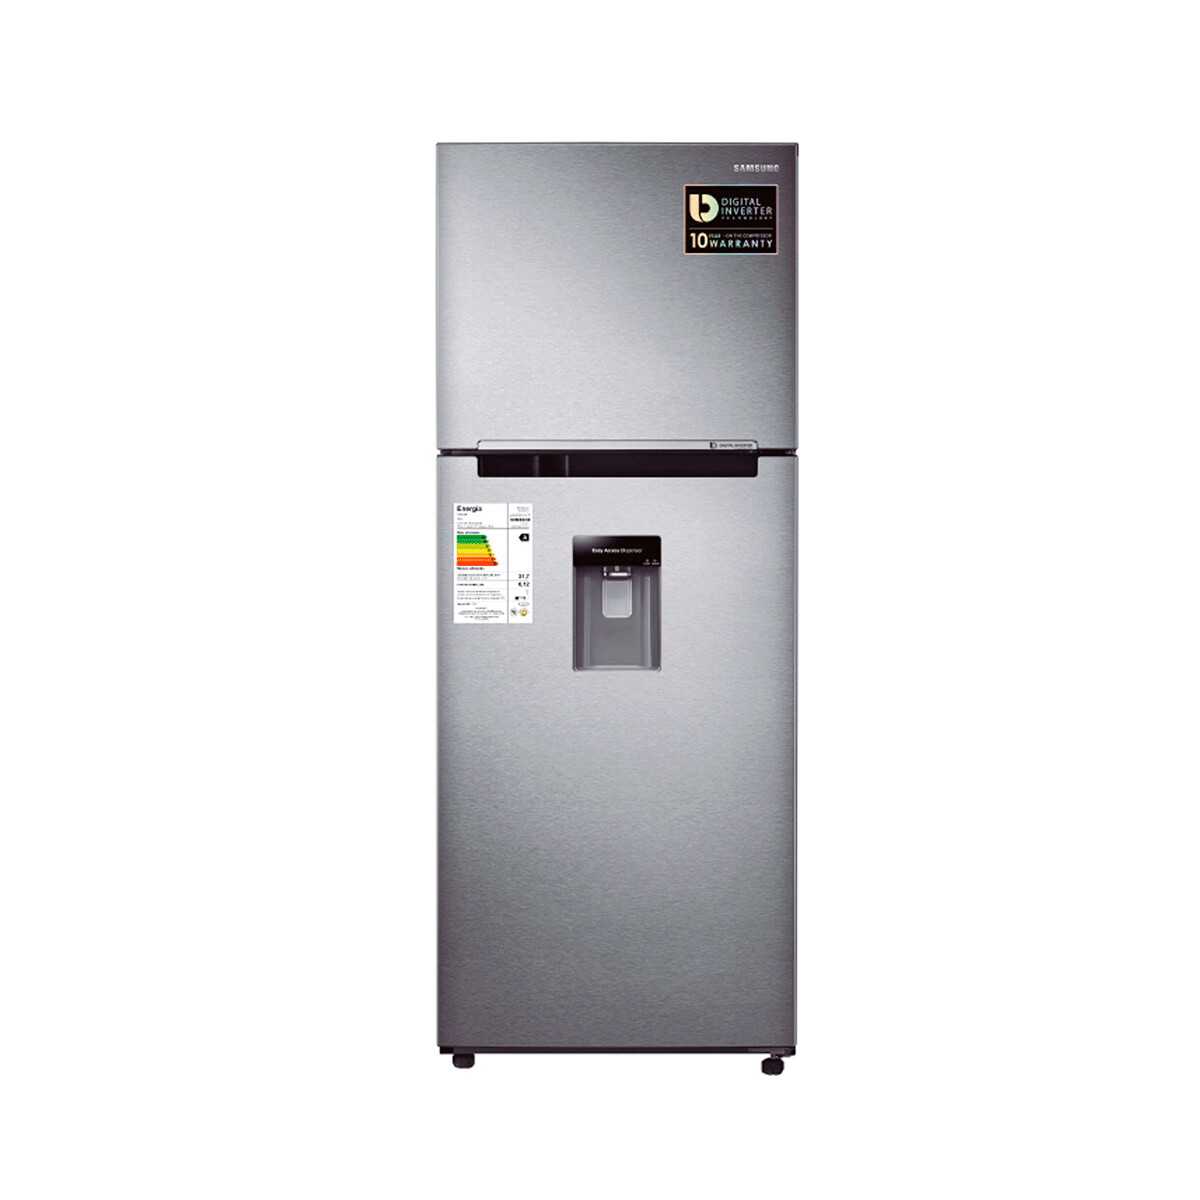 Refrigerador 327 Lts. Twing Cooling Plus Samsung Rt32t573bsl 